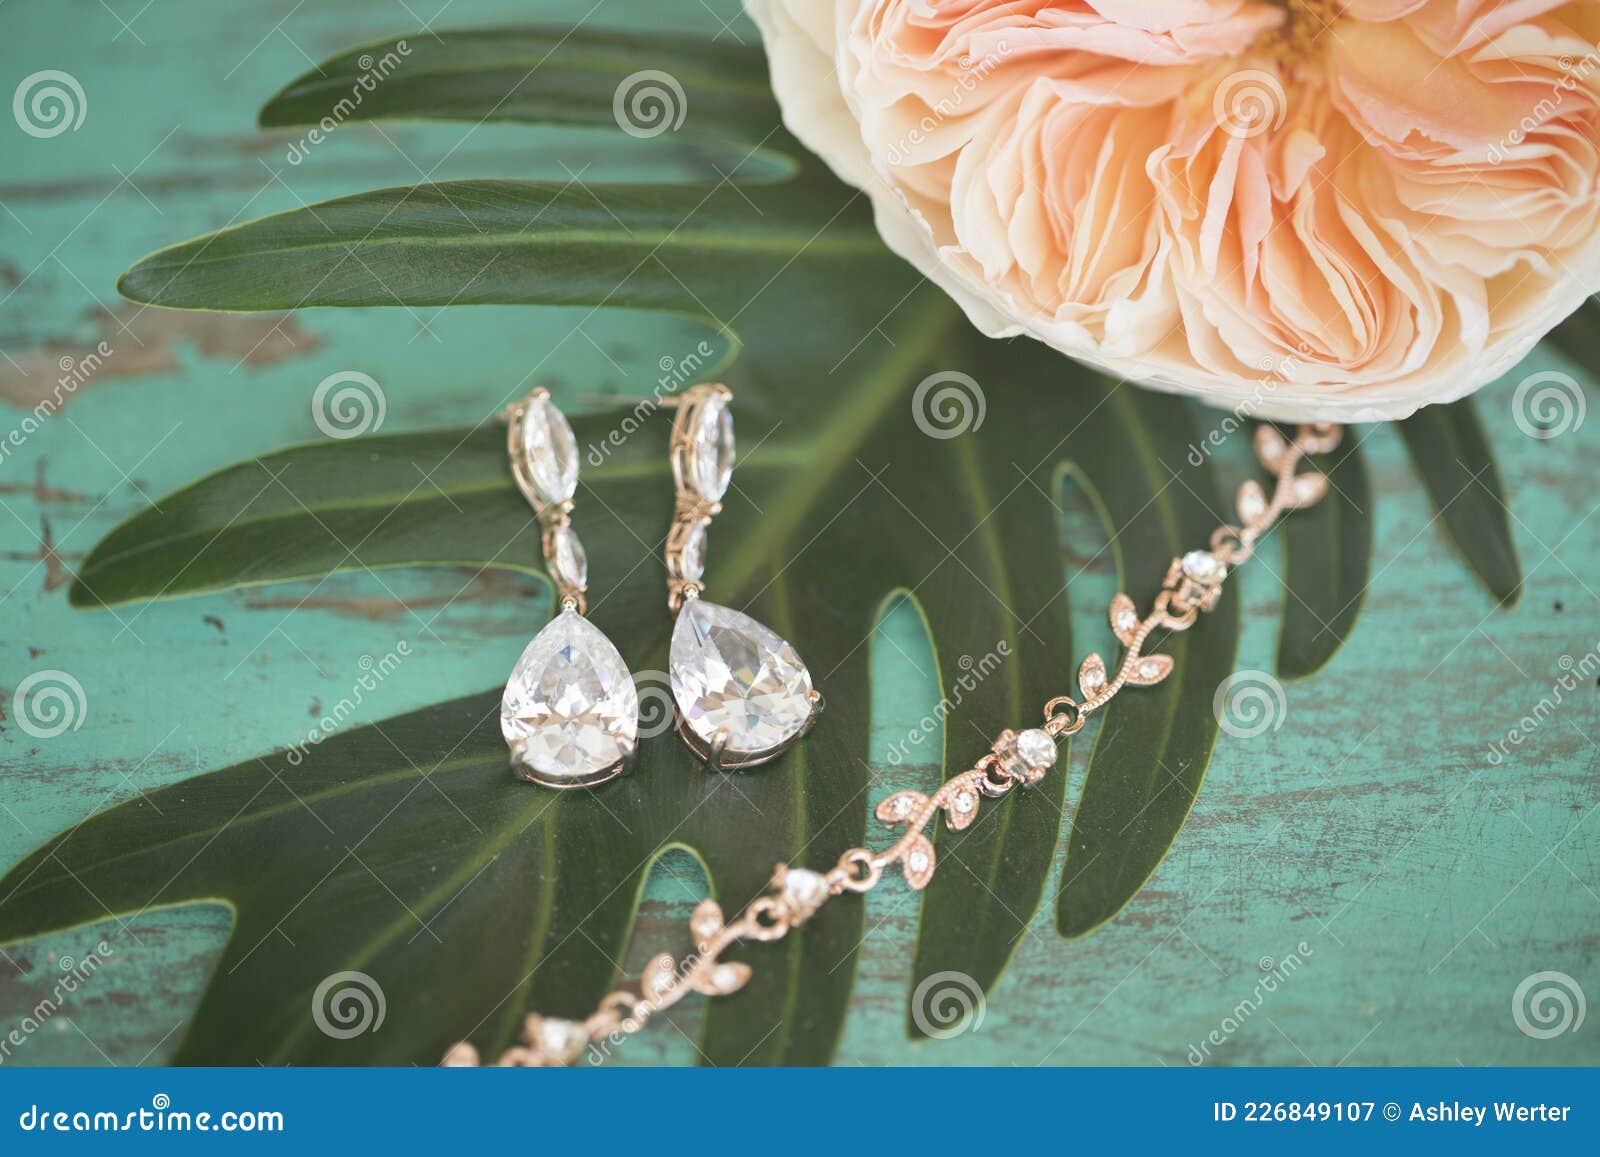 details of wedding jewelry and accessories